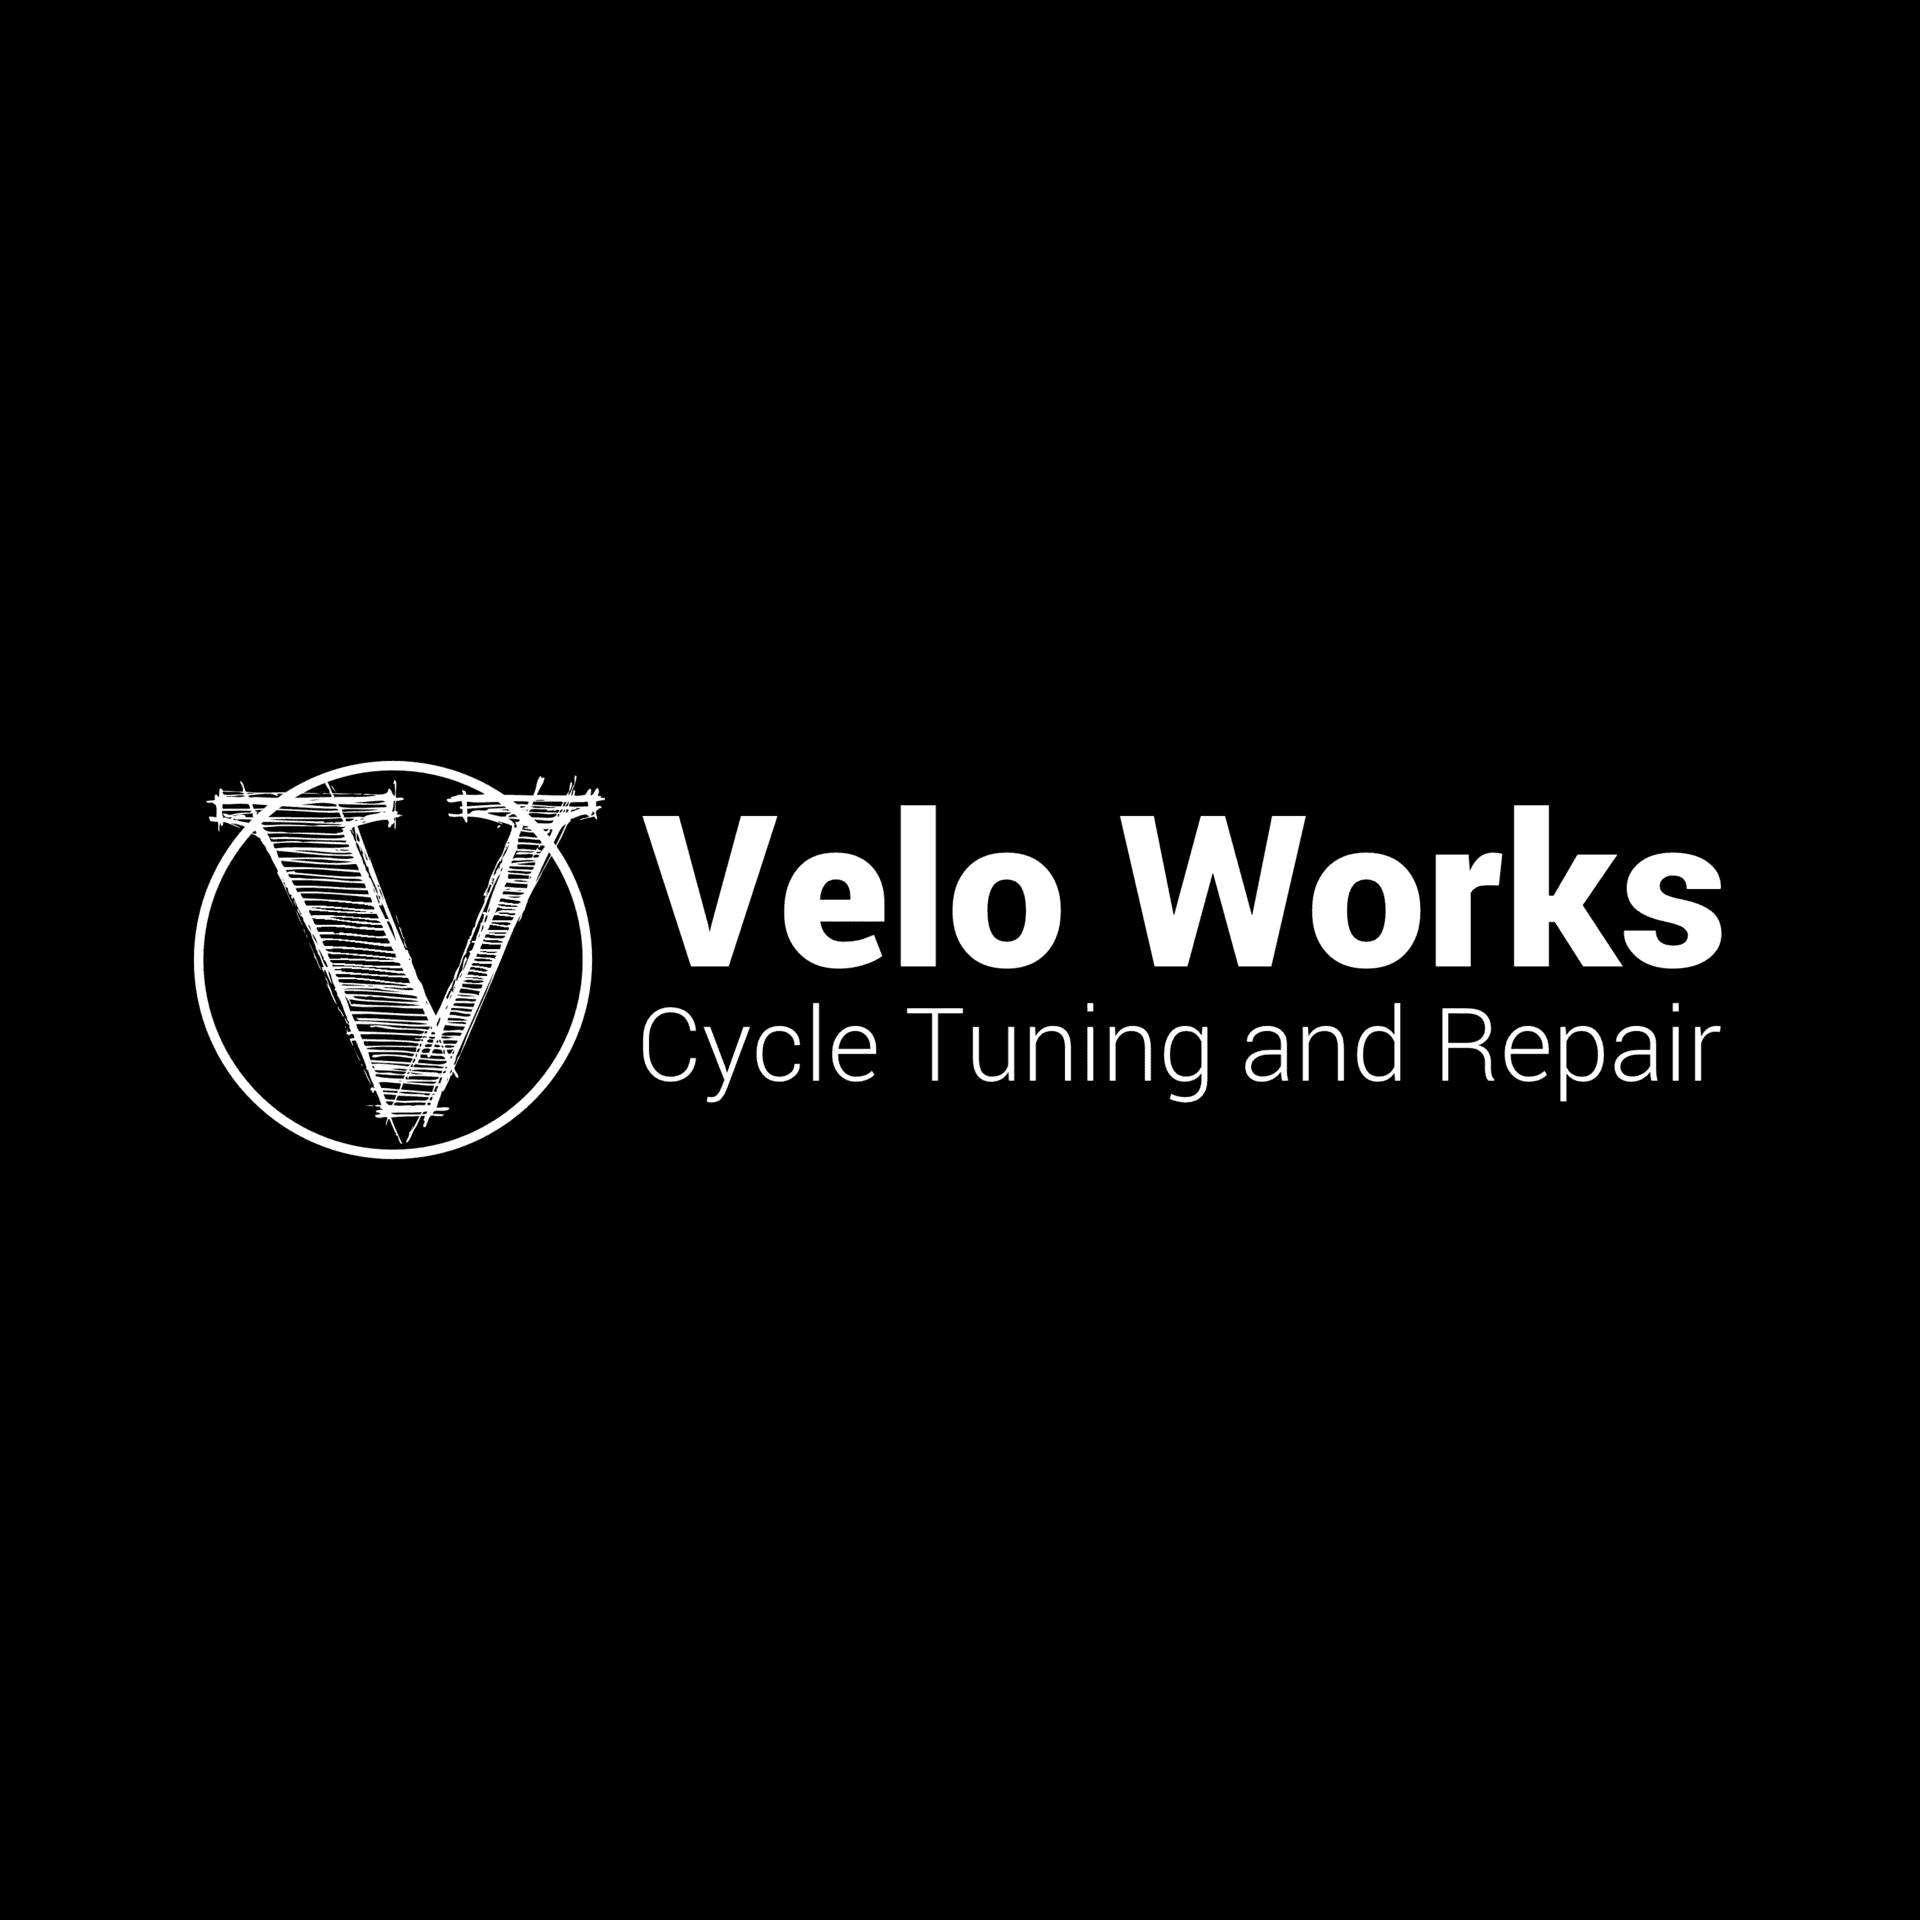 the velo works